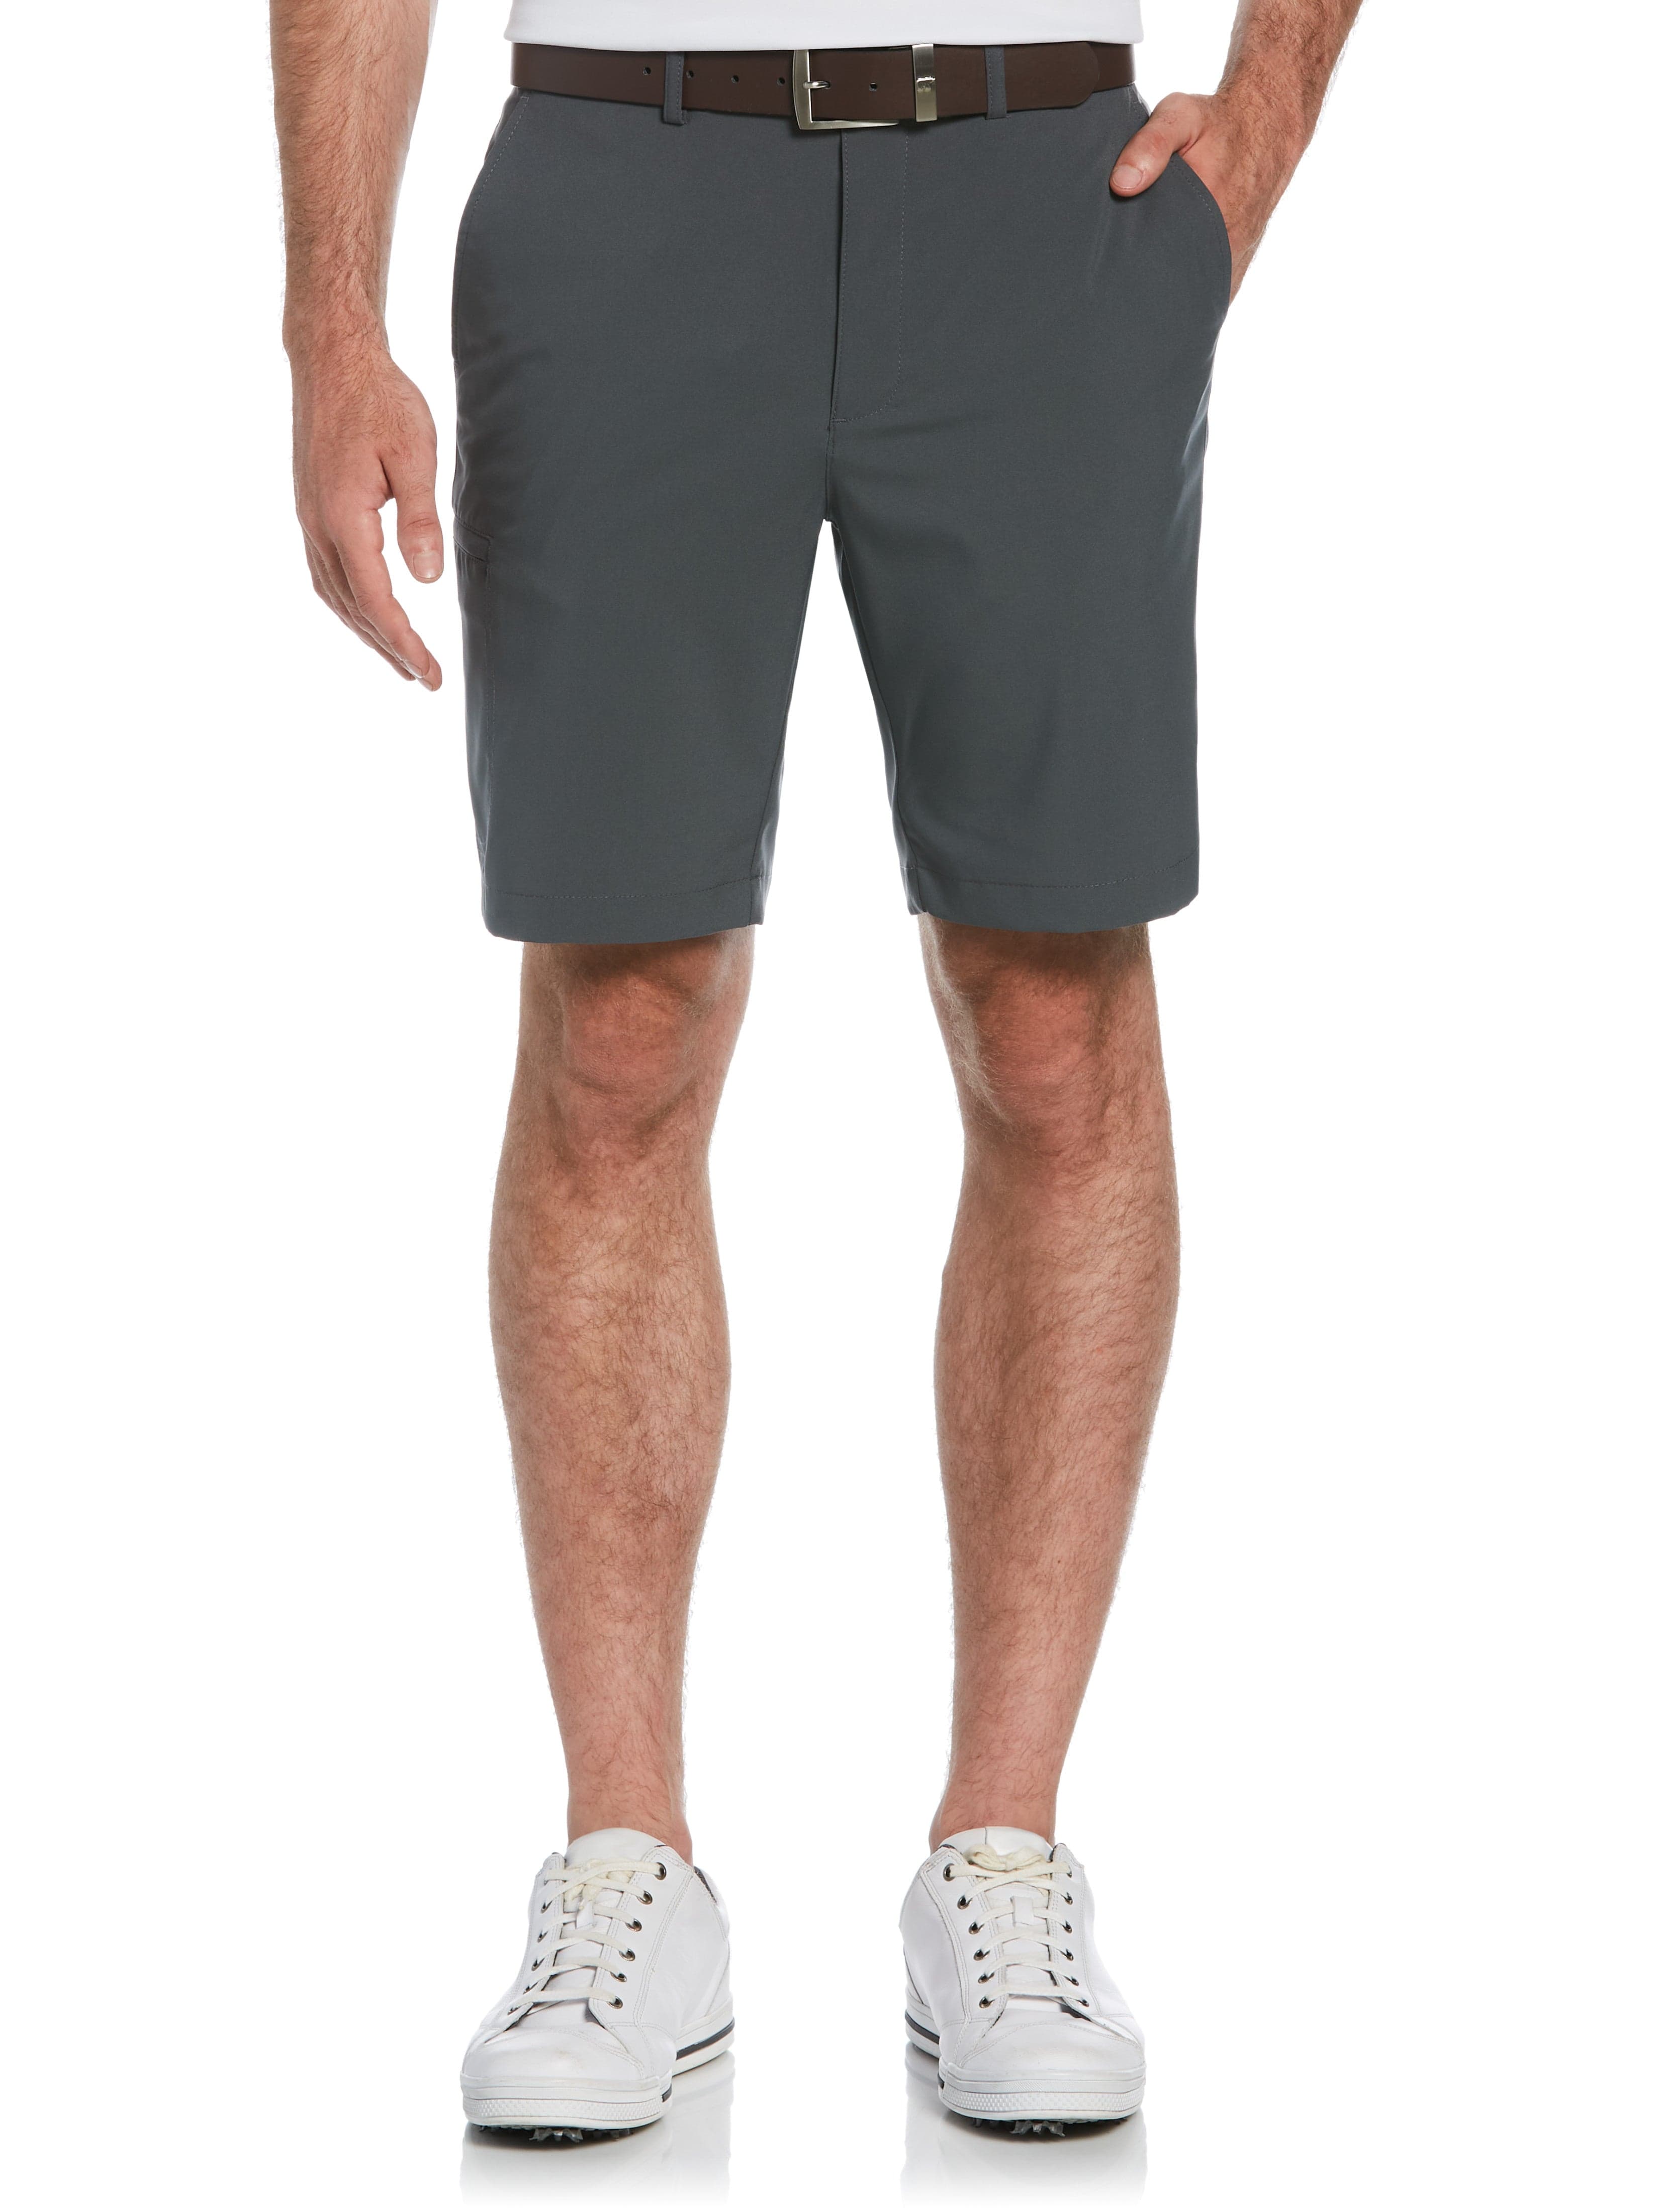 Jack Nicklaus Mens Flat Front Solid Golf Shorts w/ Cargo Pocket, Size 42, Iron Gate Gray, 100% Polyester | Golf Apparel Shop